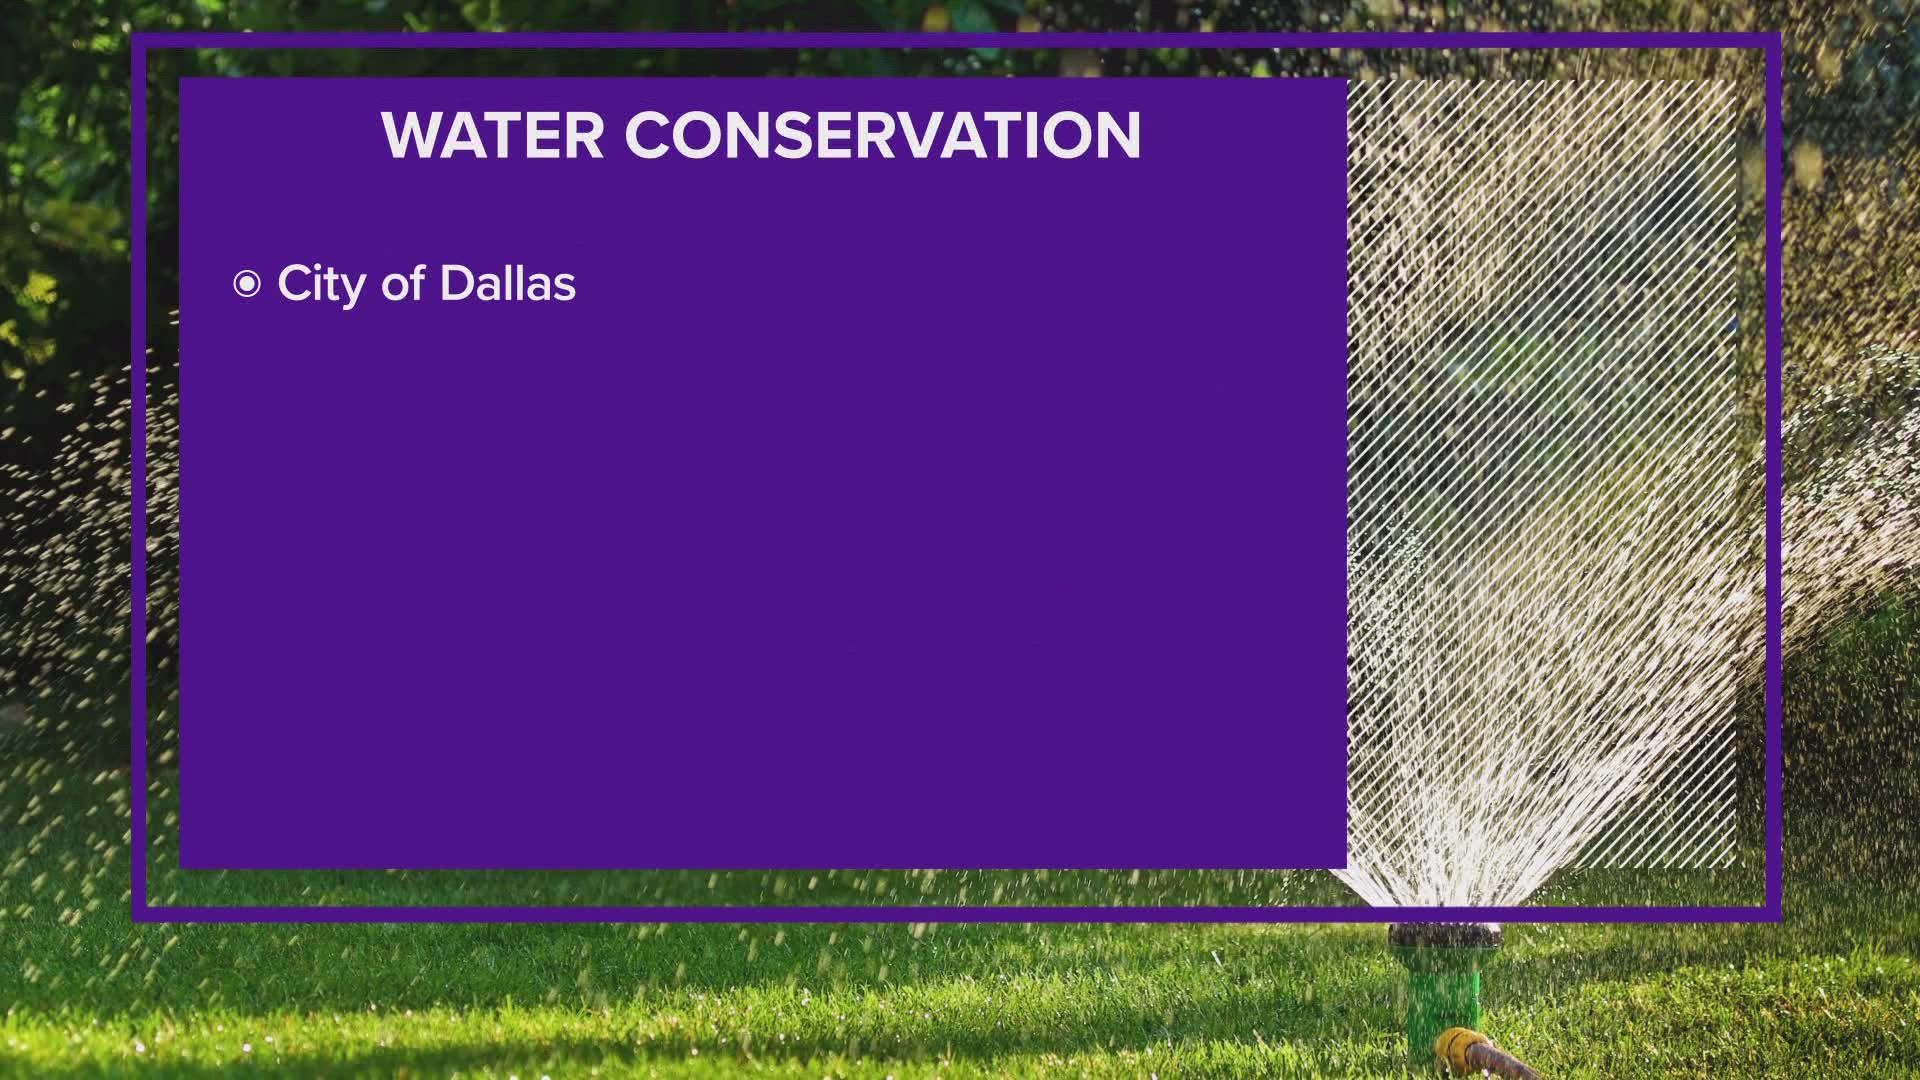 The City of Dallas is asking for residents to conserve water amid extreme heat and dry conditions.